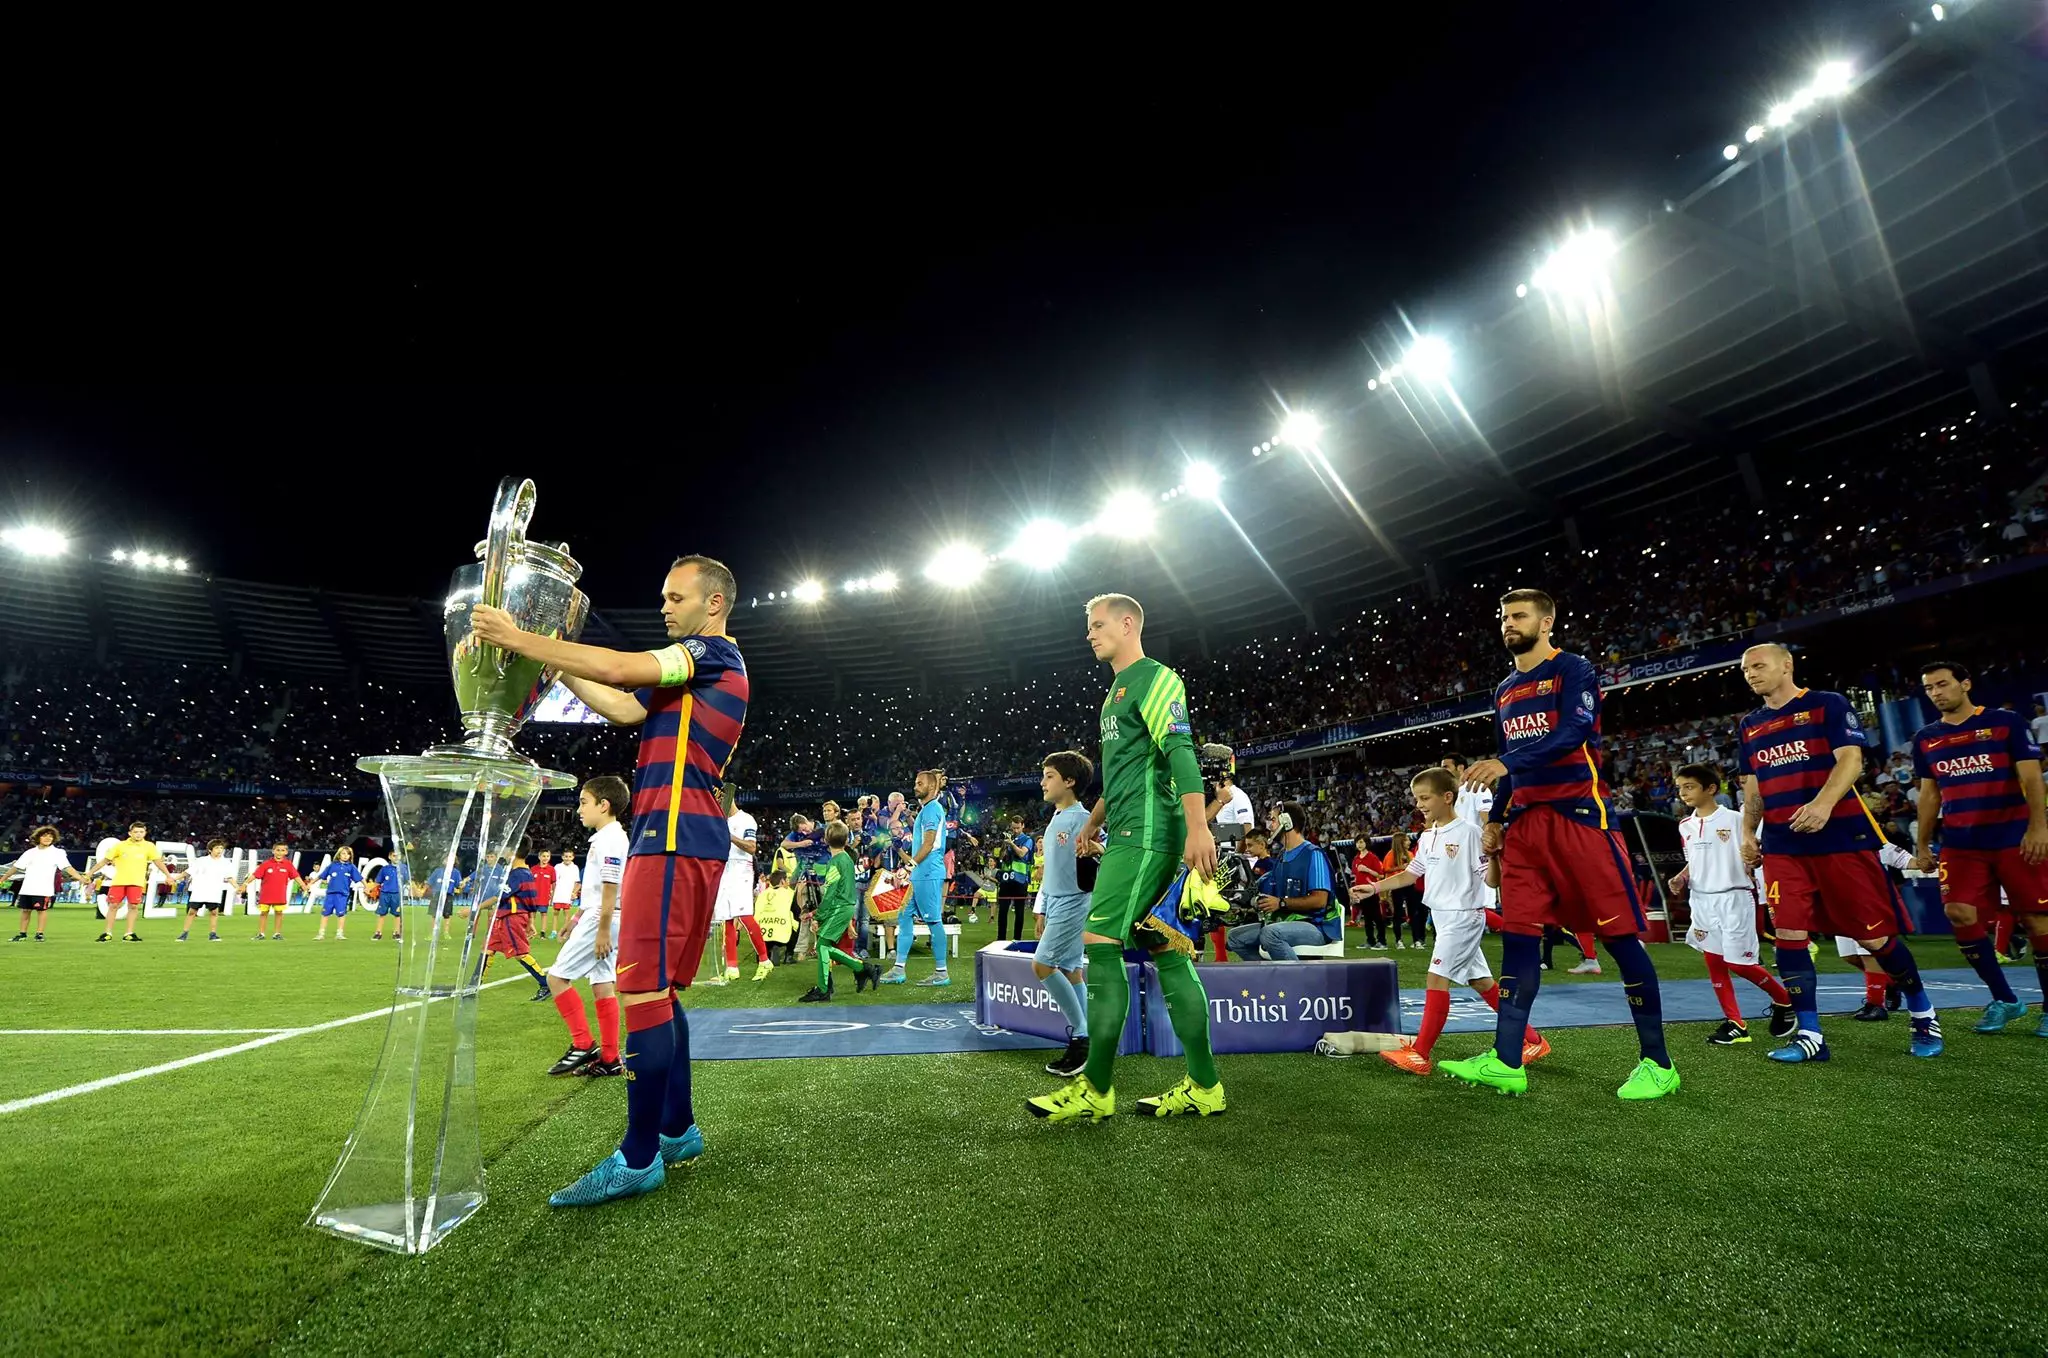 Iniesta with his fourth Champions League trophy. Image: PA Images